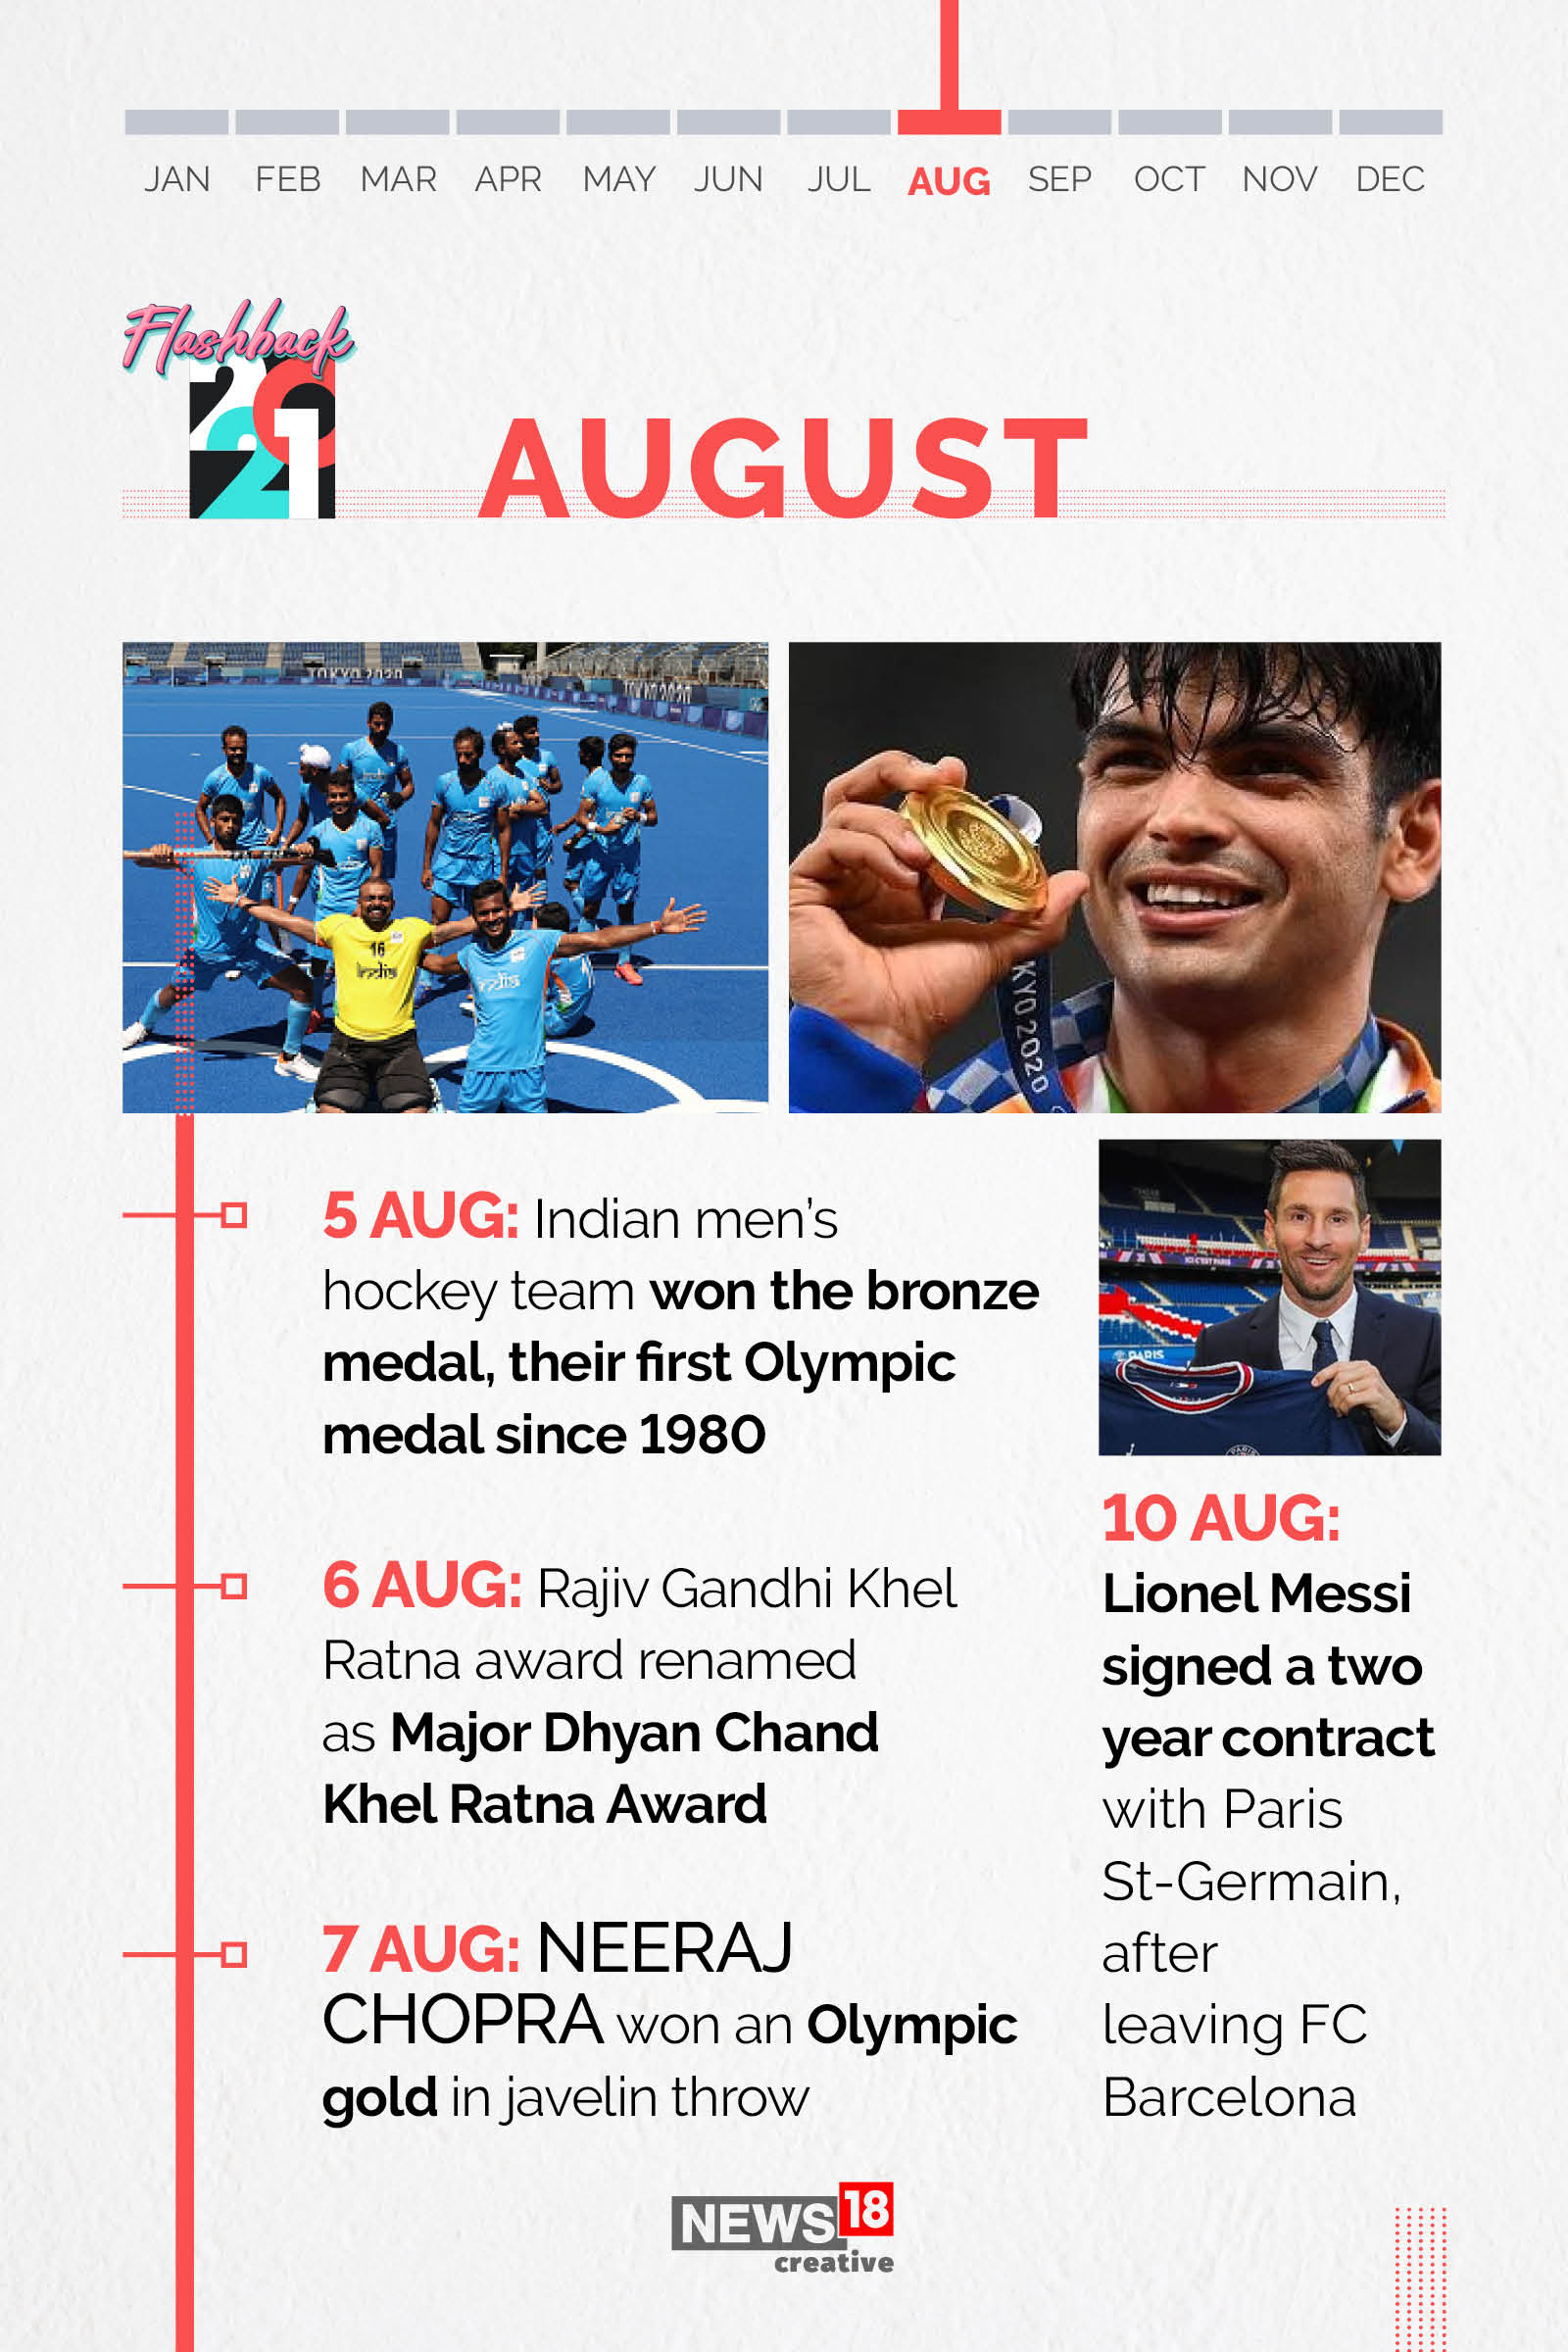 Forbes India 2021 Rewind: Best sports memories from an uncertain year